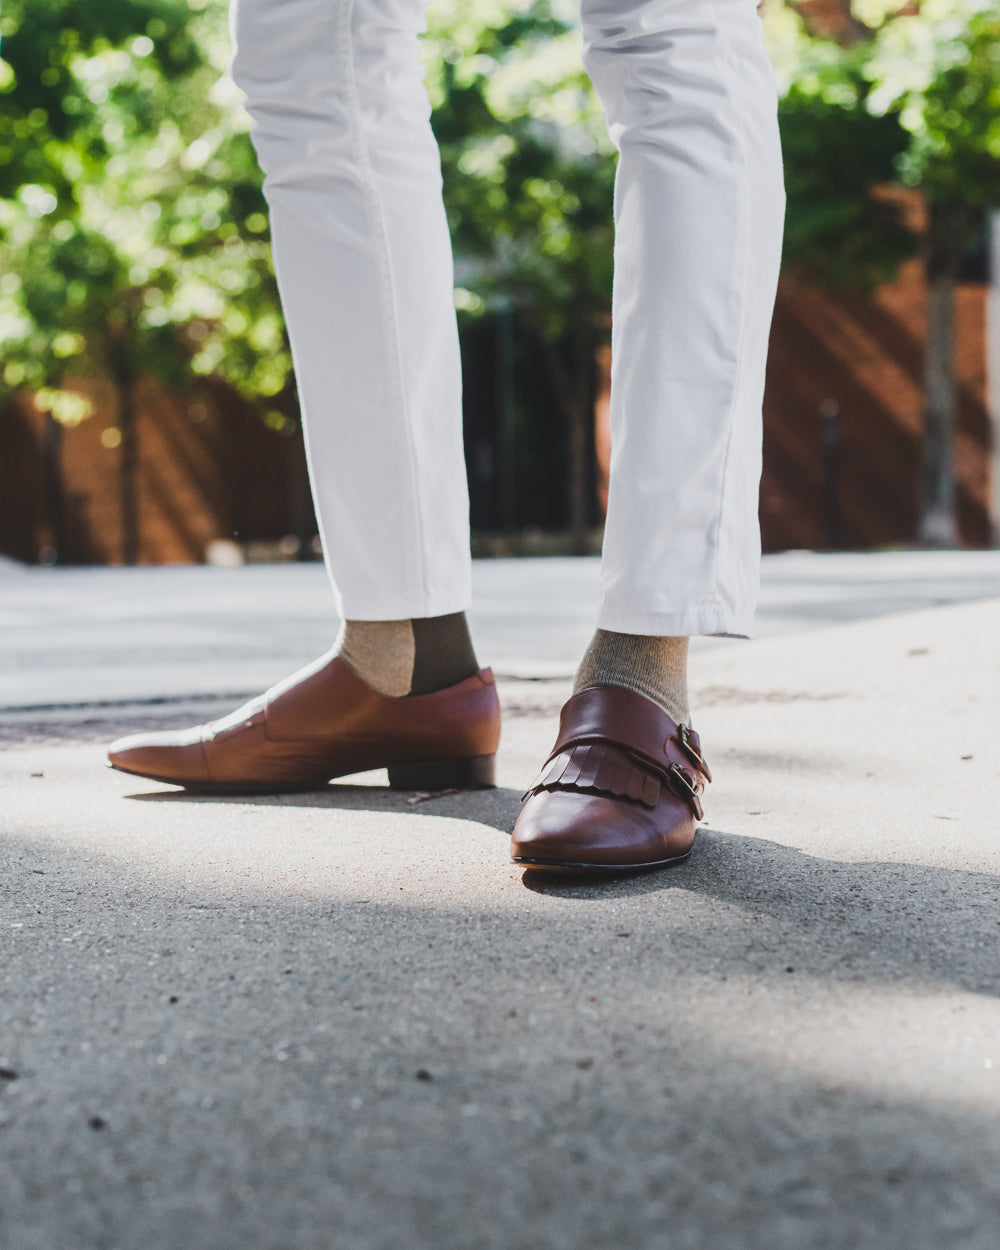 light brown over the calf dress socks with brown stripe, white pants, brown dress shoes, bushes in thee background